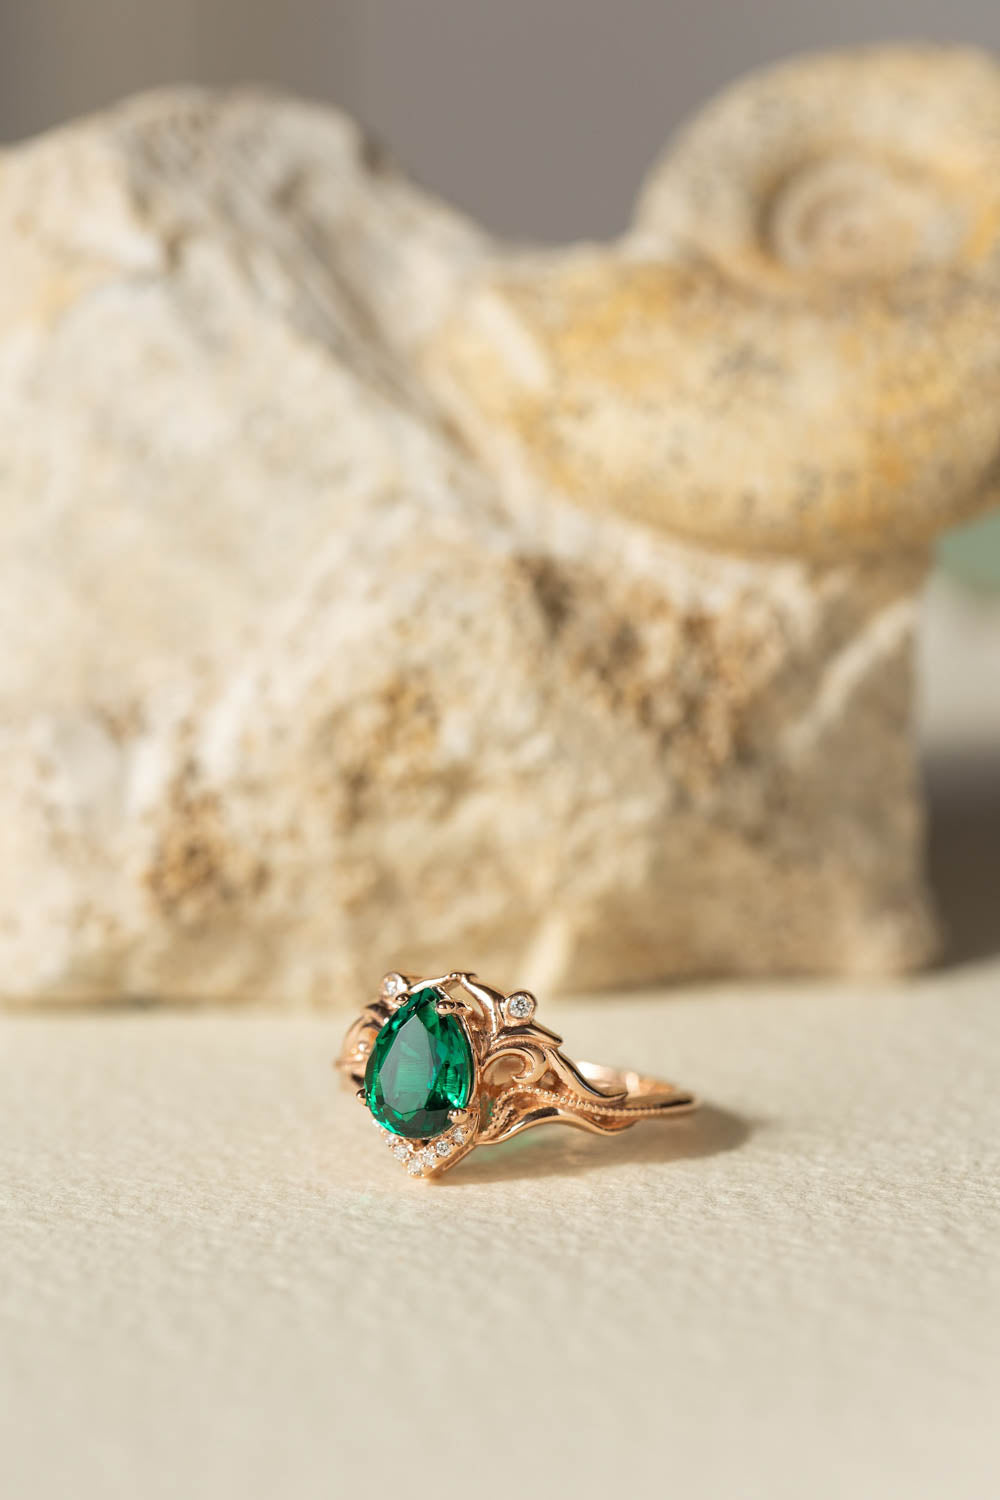 Pear lab emerald engagement ring, vintage inspired gold ring with diamonds / Lida small - Eden Garden Jewelry™